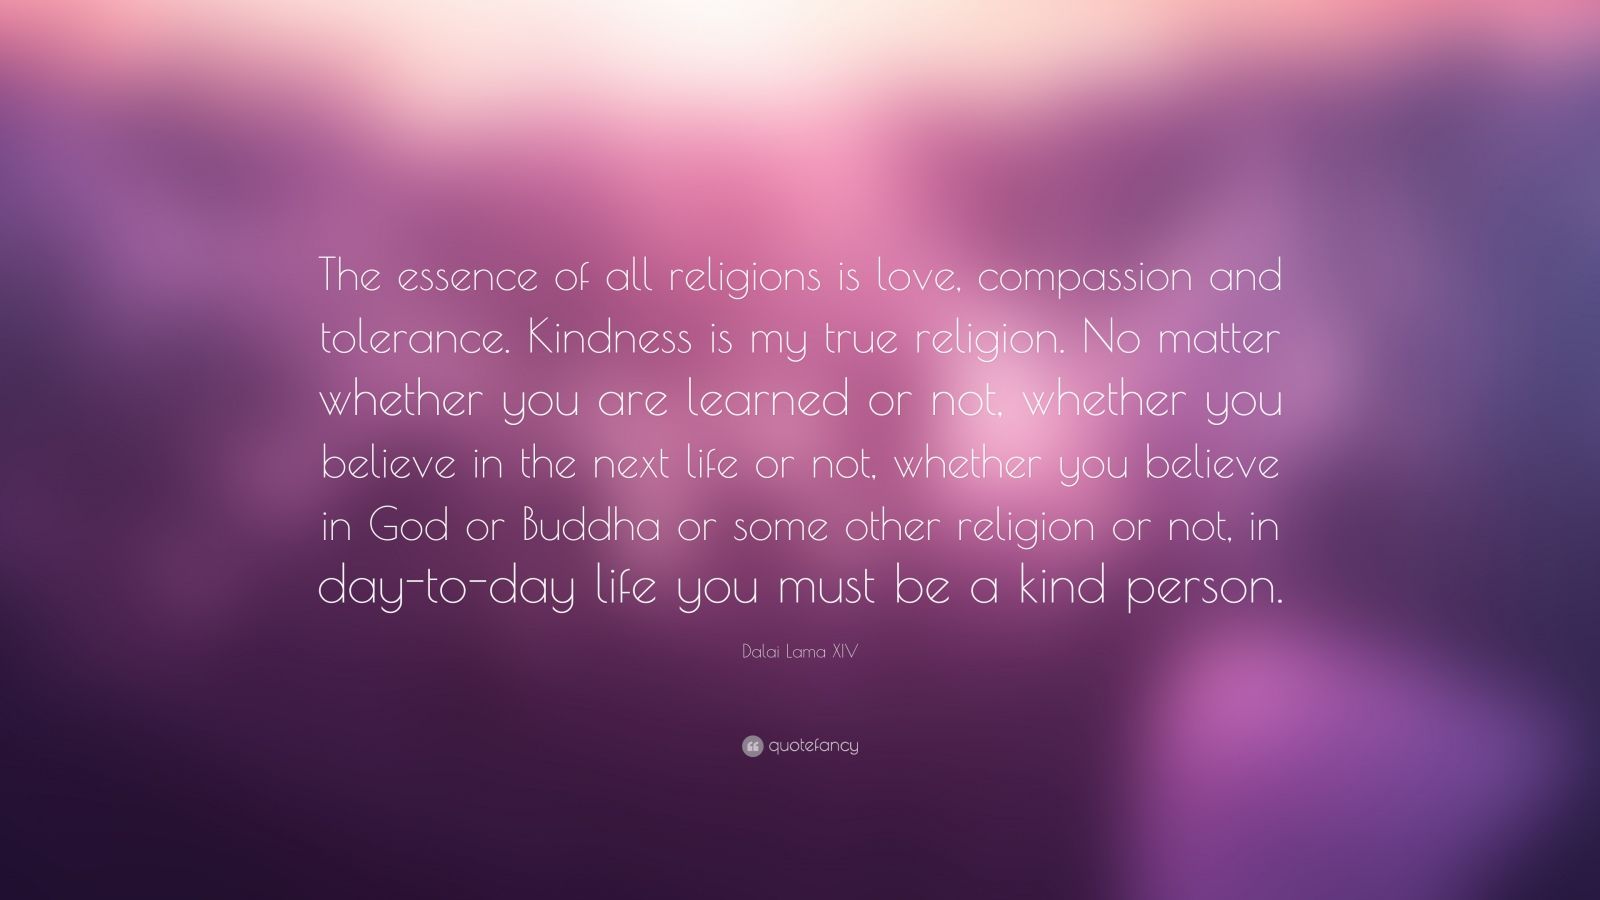 Dalai Lama XIV Quote: "The essence of all religions is love, compassion and tolerance. Kindness ...